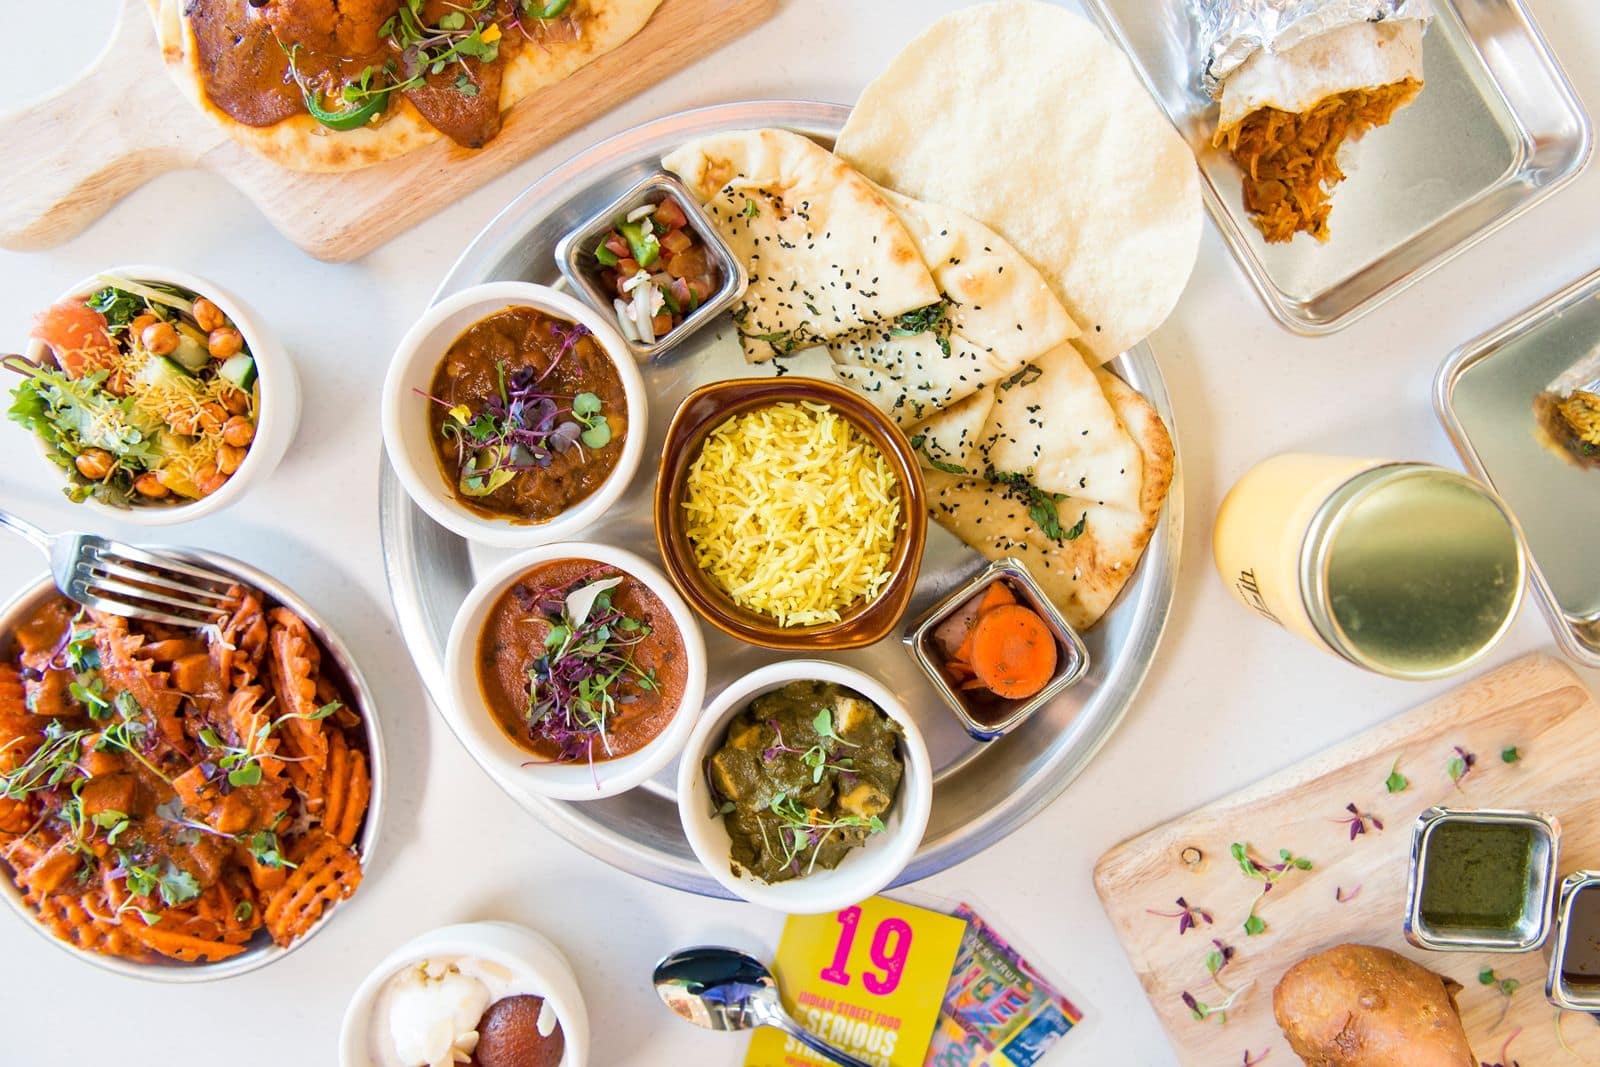 Curry Up Now Opening Irvine Location on January 29